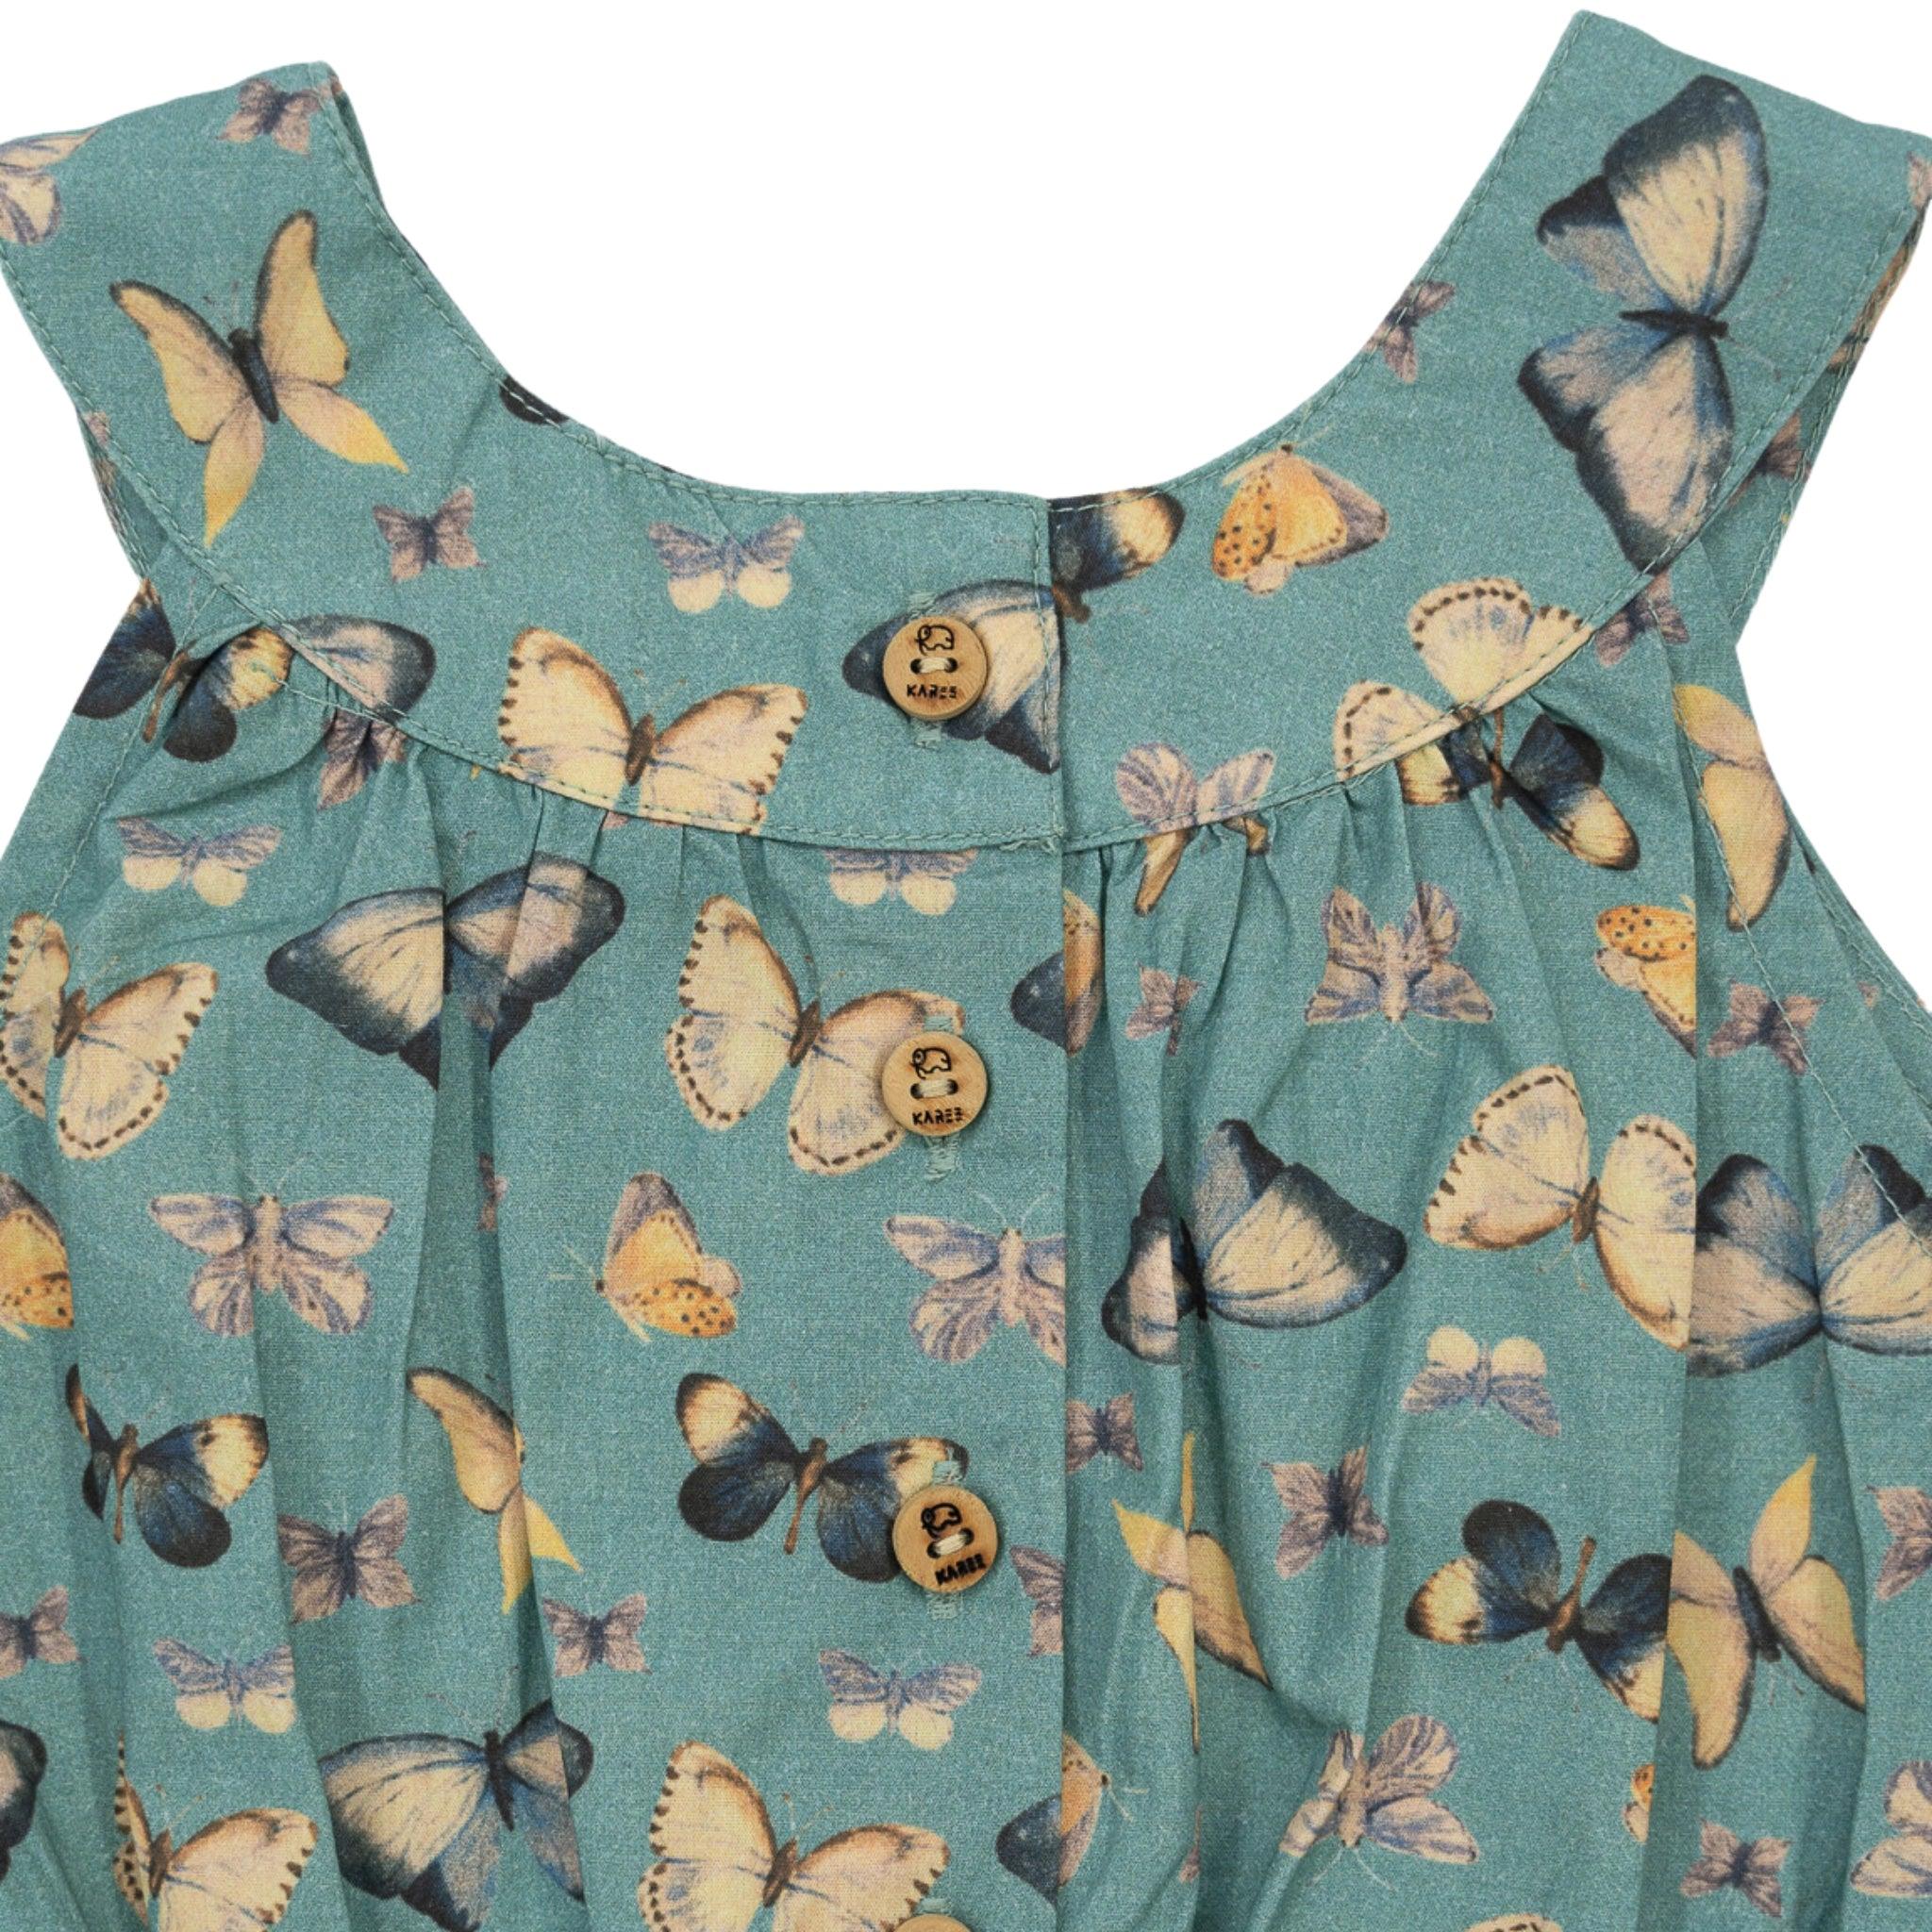 Close-up of a Blue Surf Adventure-ready Cotton Play Suit with a butterfly print and wooden buttons by Karee.